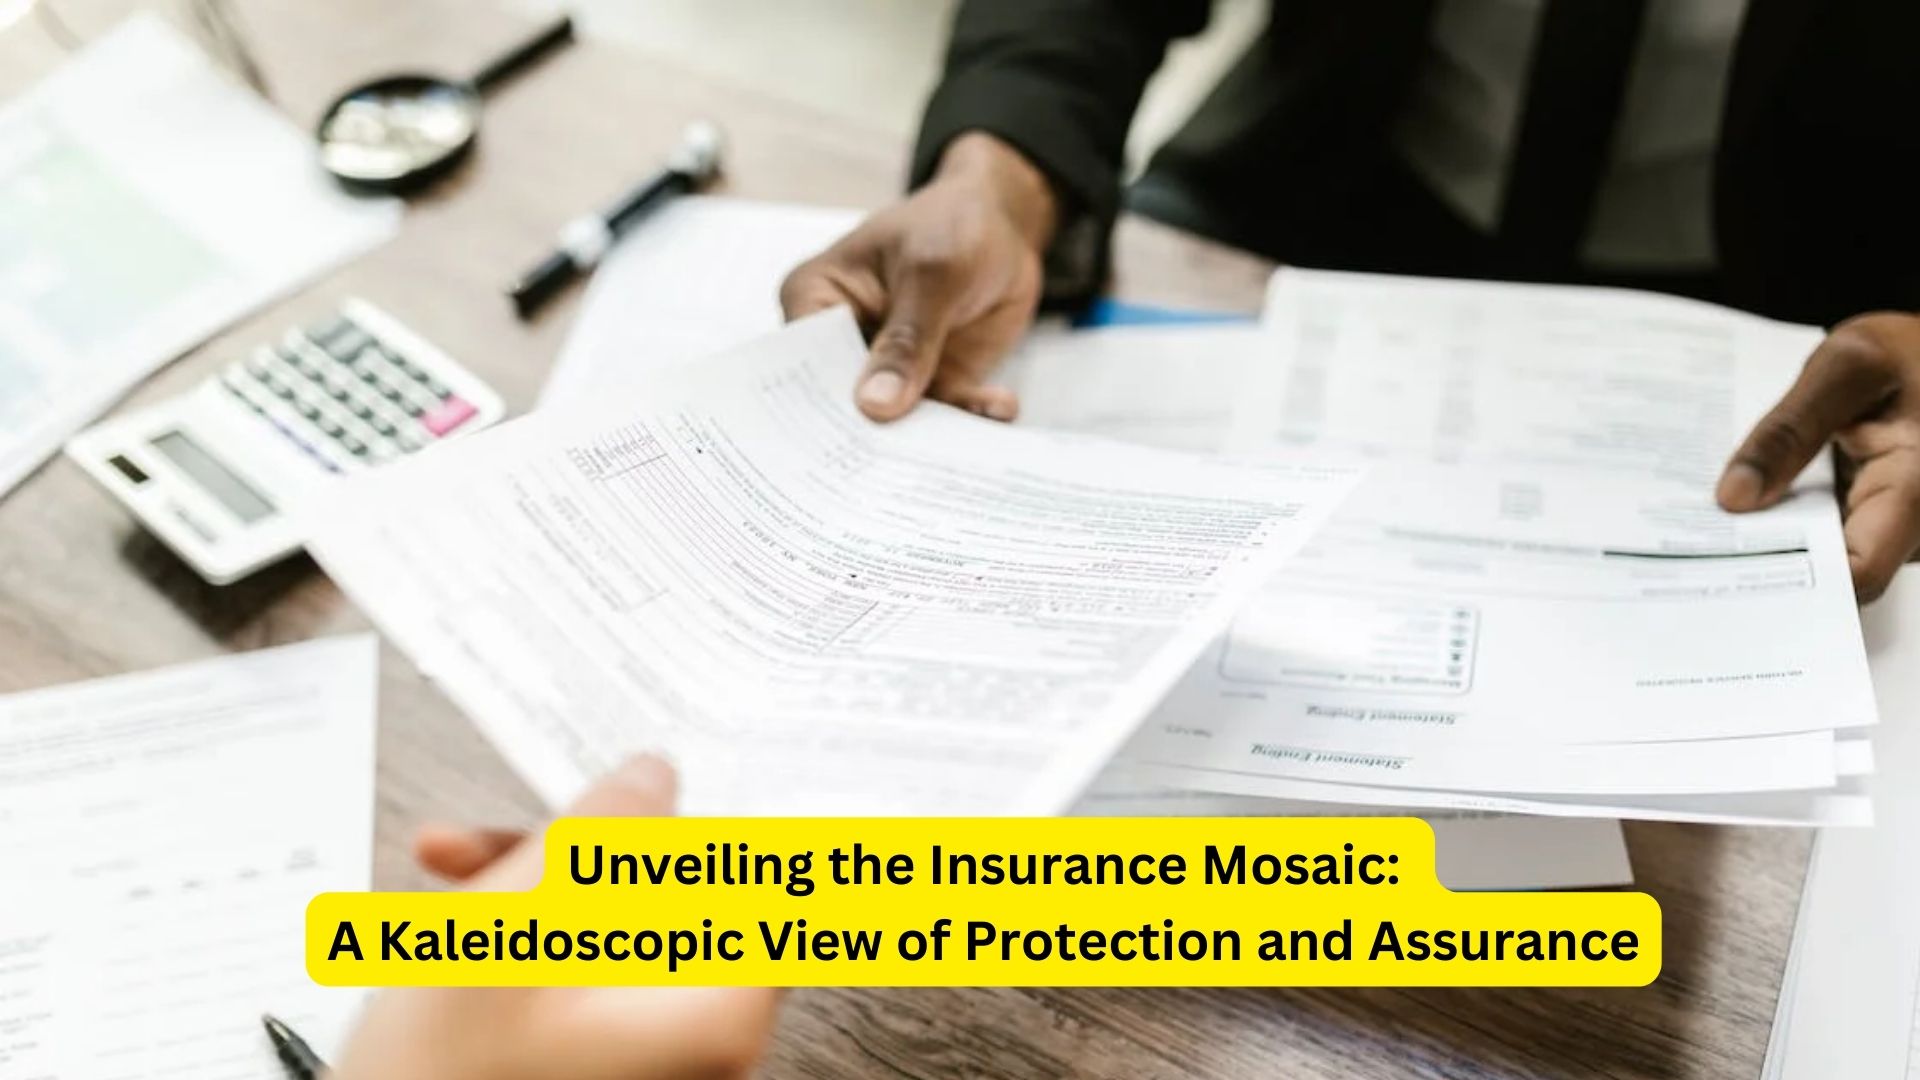 Unveiling the Insurance Mosaic: A Kaleidoscopic View of Protection and Assurance